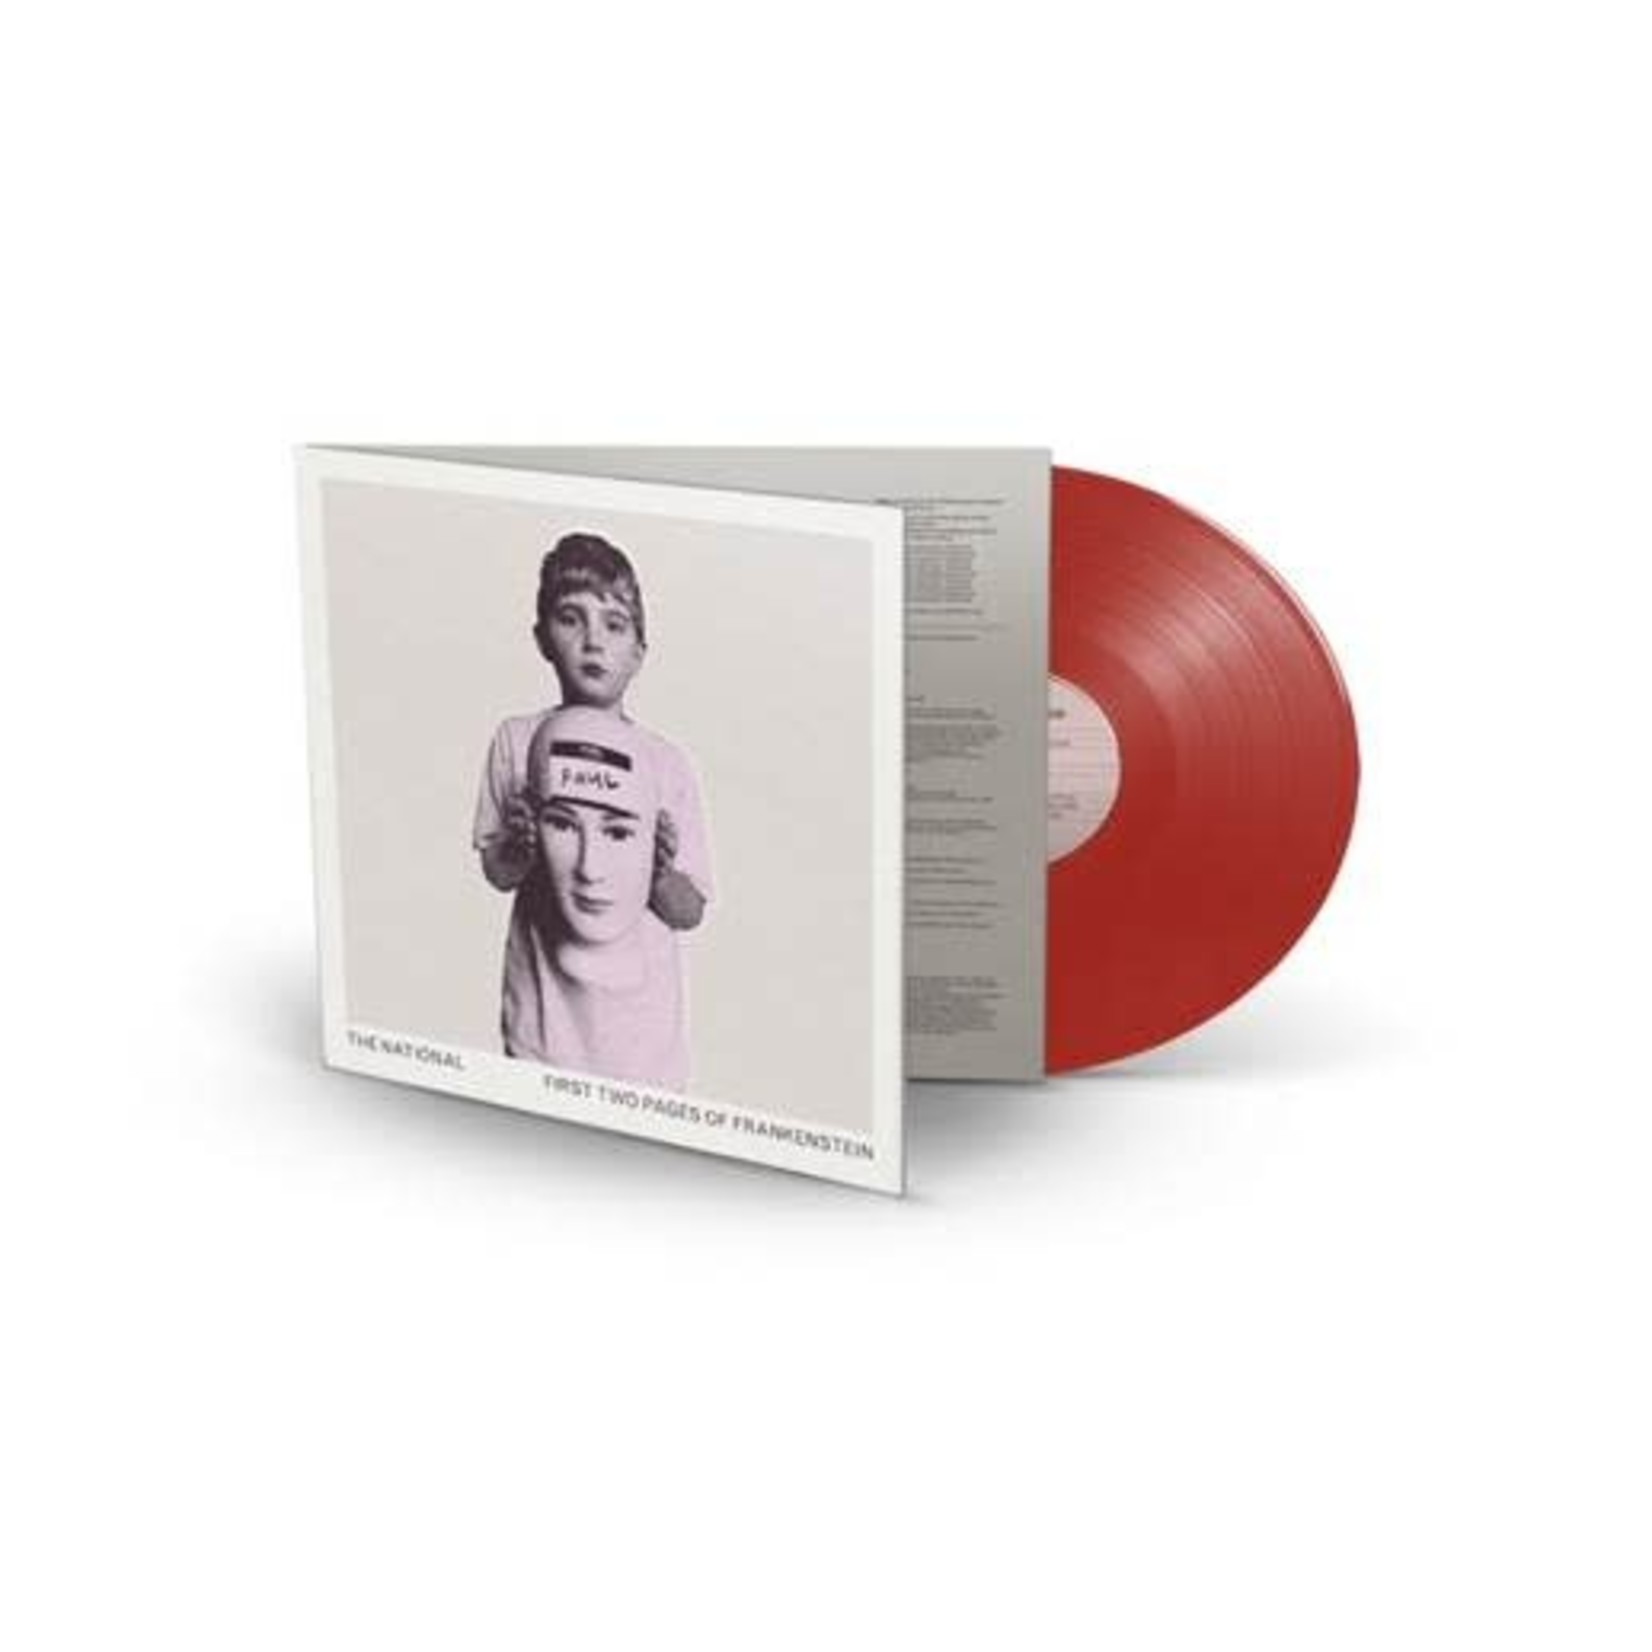 National - First Two Pages Of Frankenstein (Indie Red Vinyl) [LP]